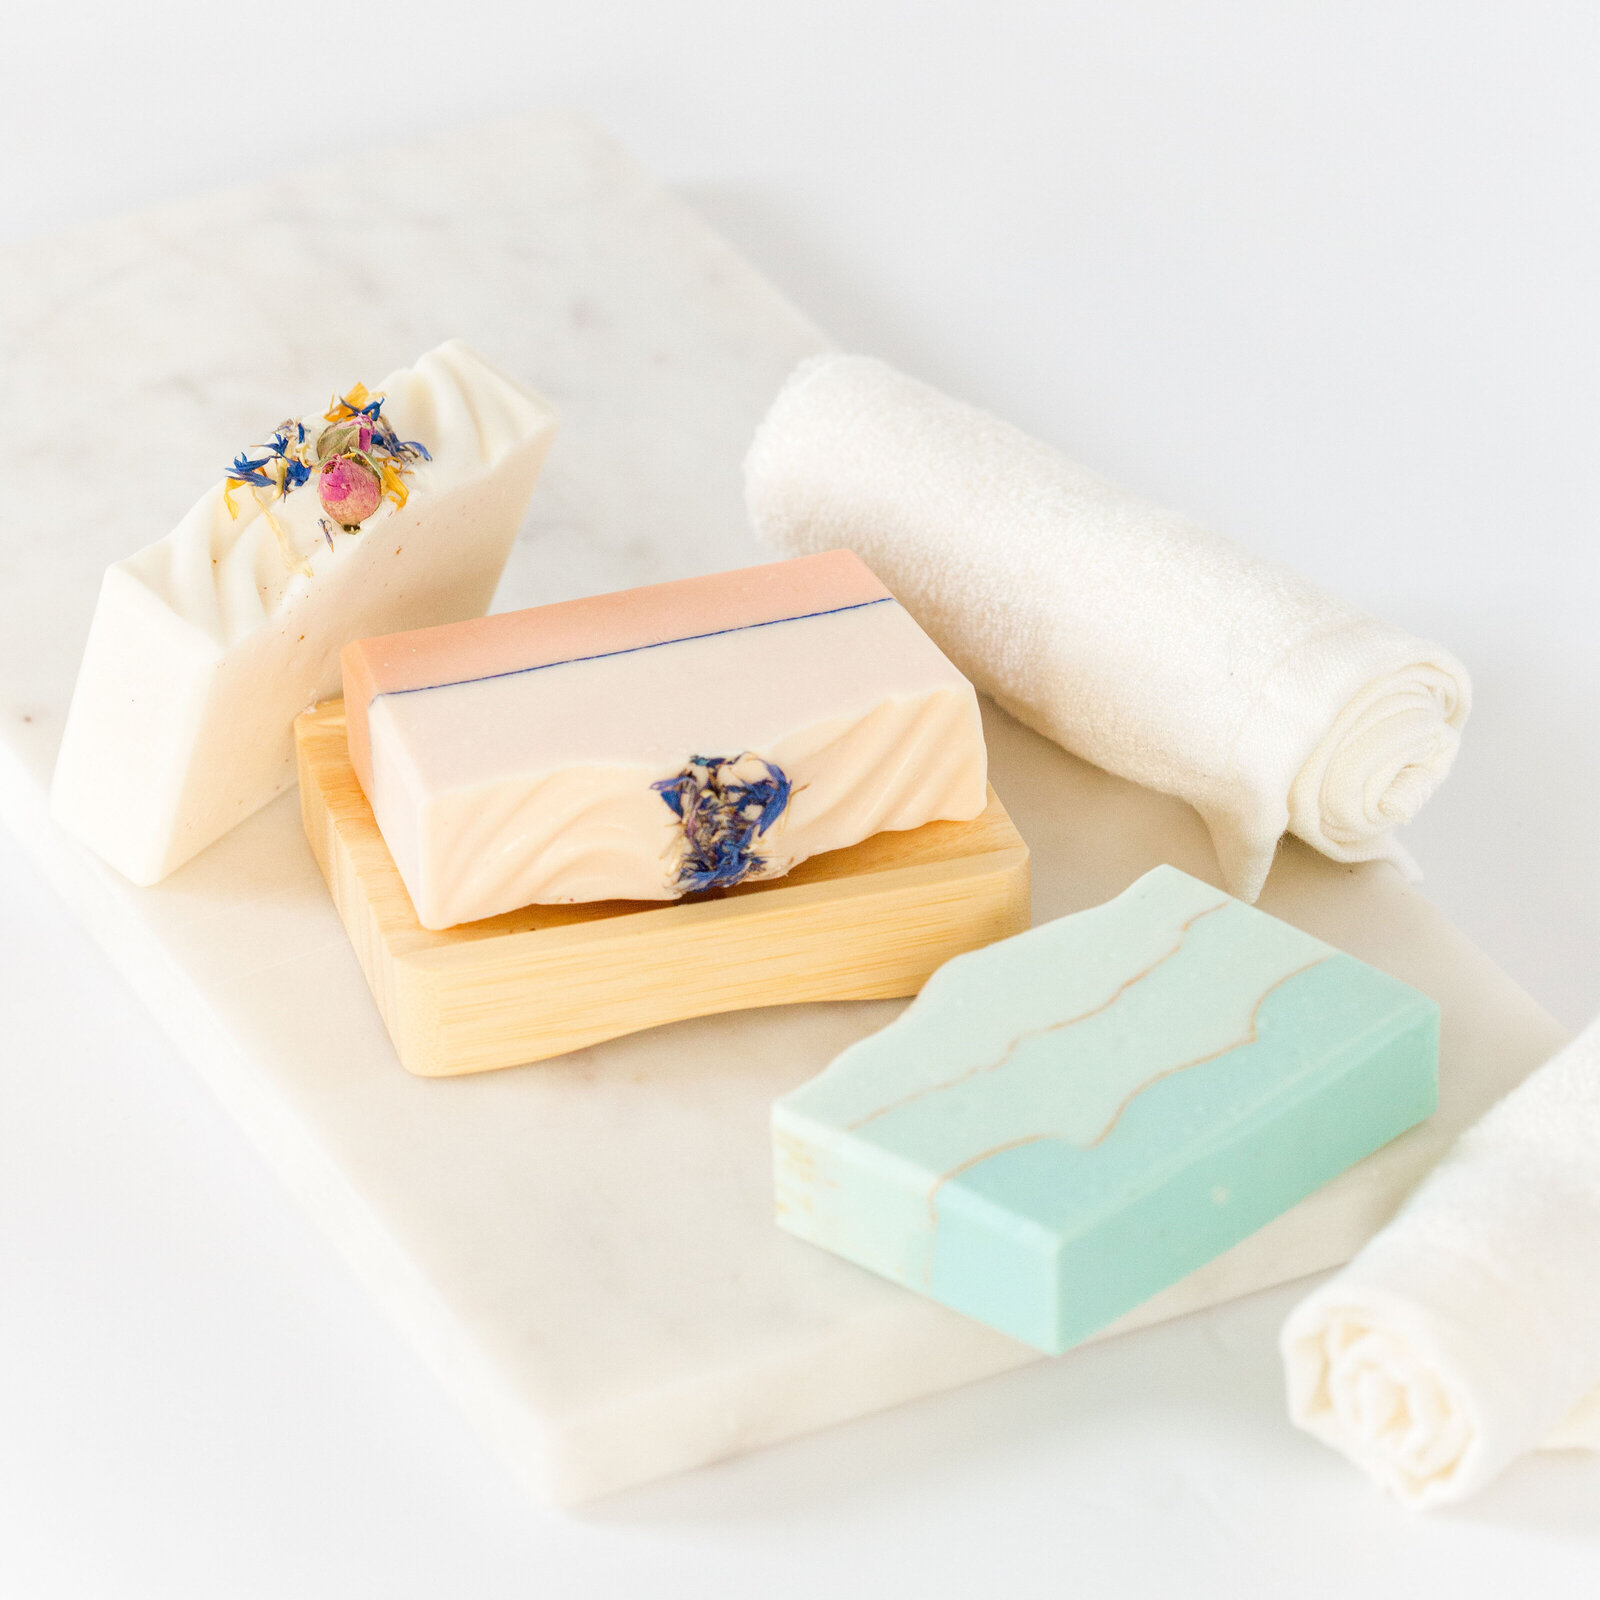 Product photographer for Etsy small businesses, farmers market, boutiques in San Diego, Southern California and beyond. Clean product photography of soap and skincare.